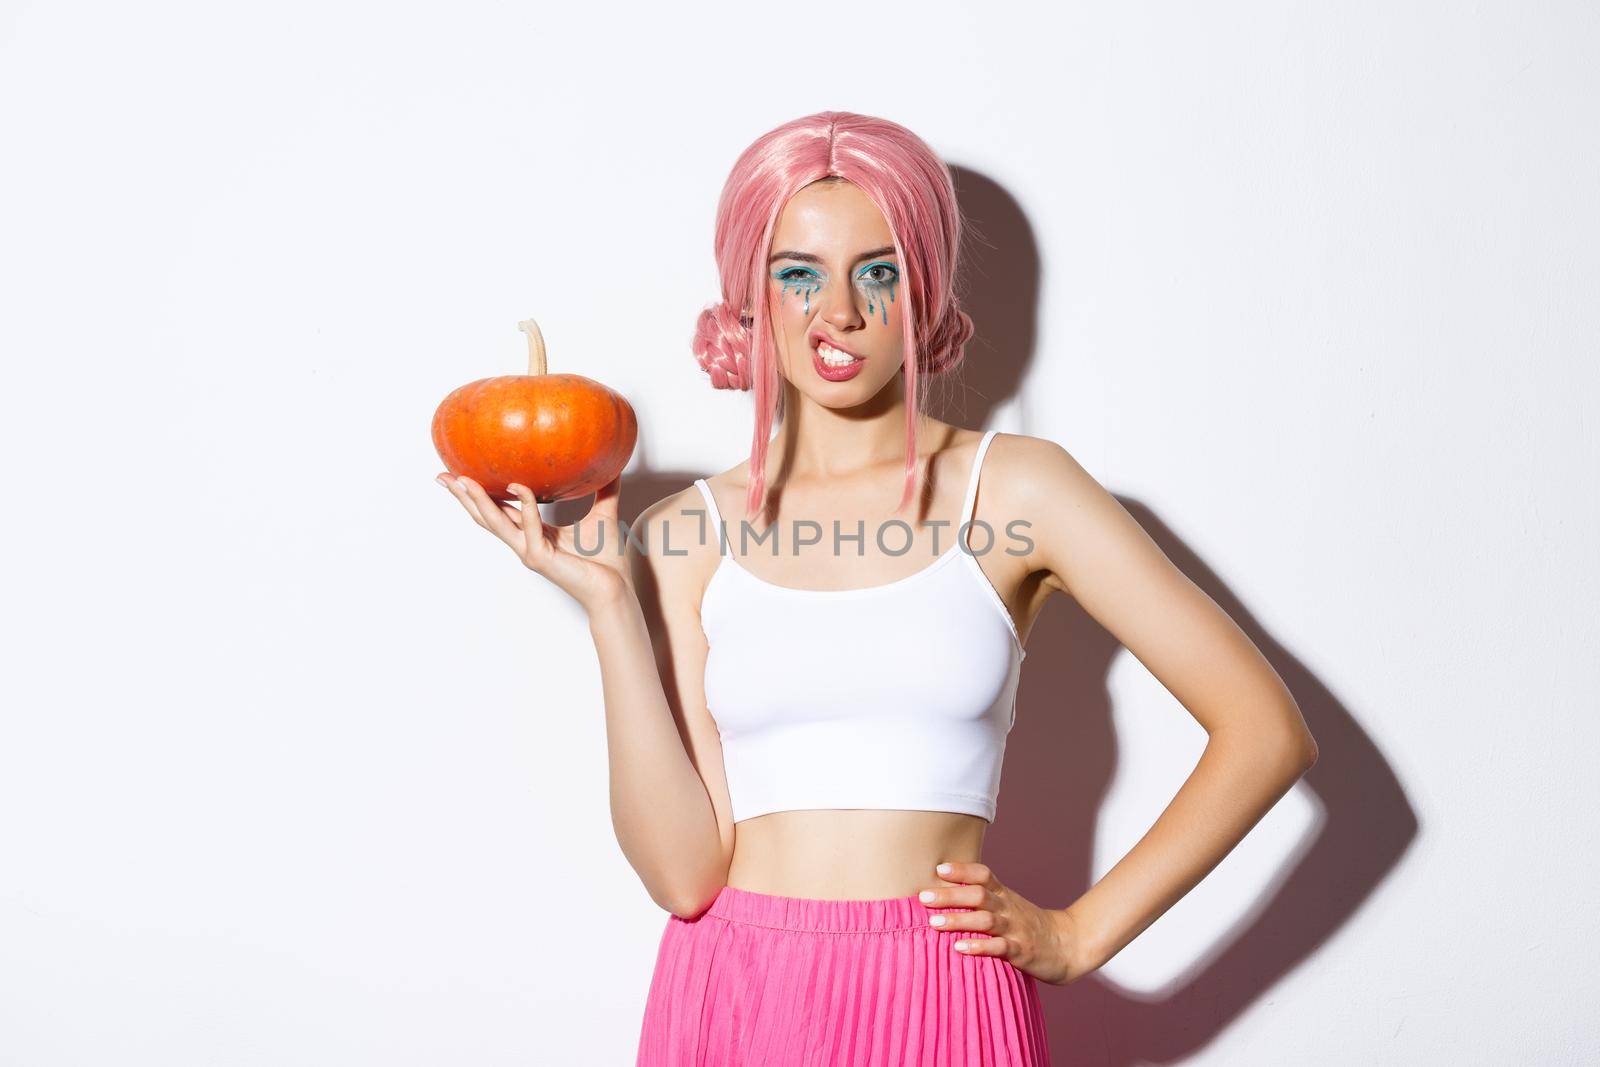 Portrait of sassy young female model in pink wig, holding pumpkin, celebrating halloween, standing over white background.